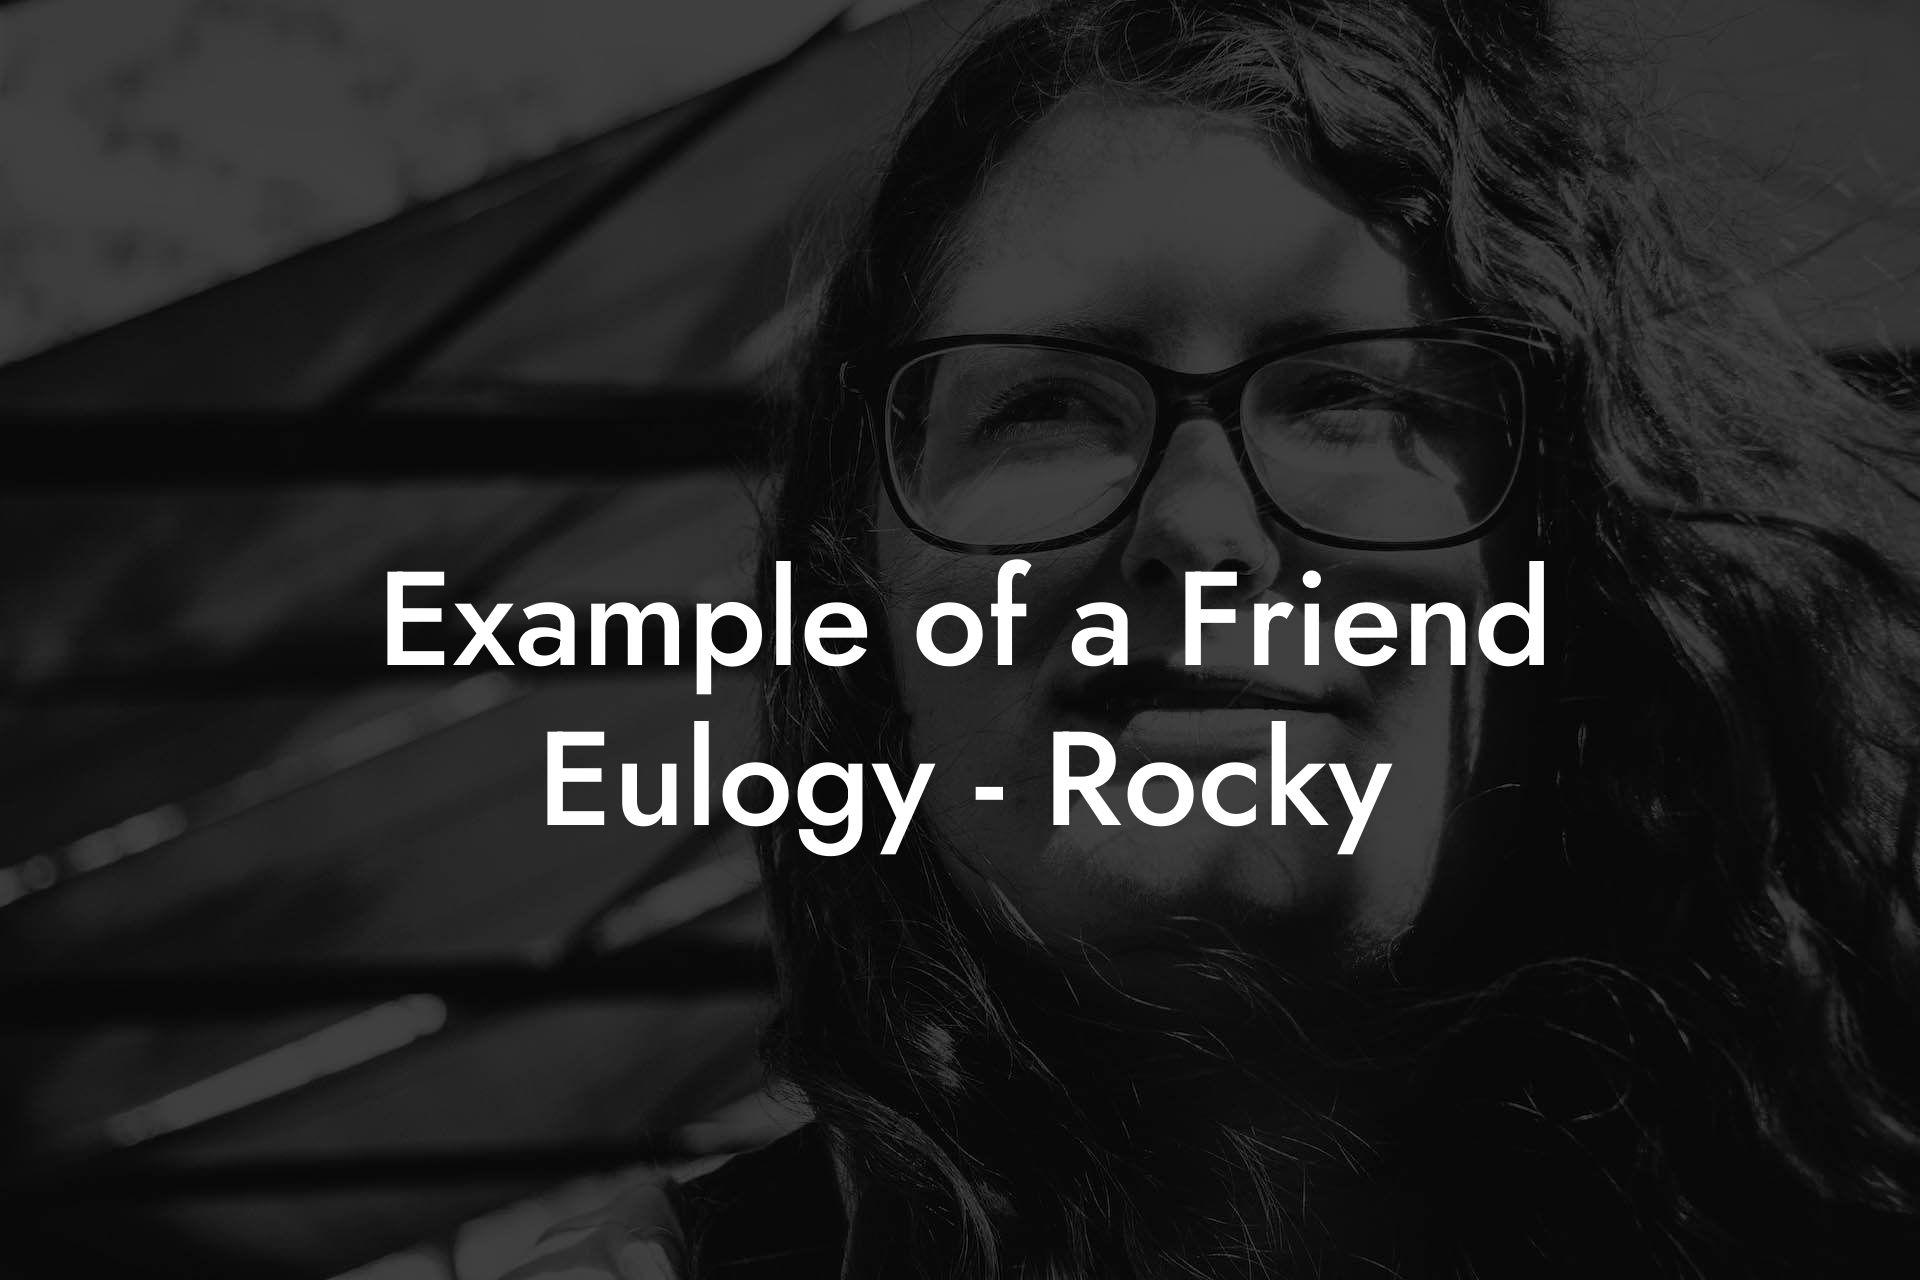 Example of a Friend Eulogy - Rocky